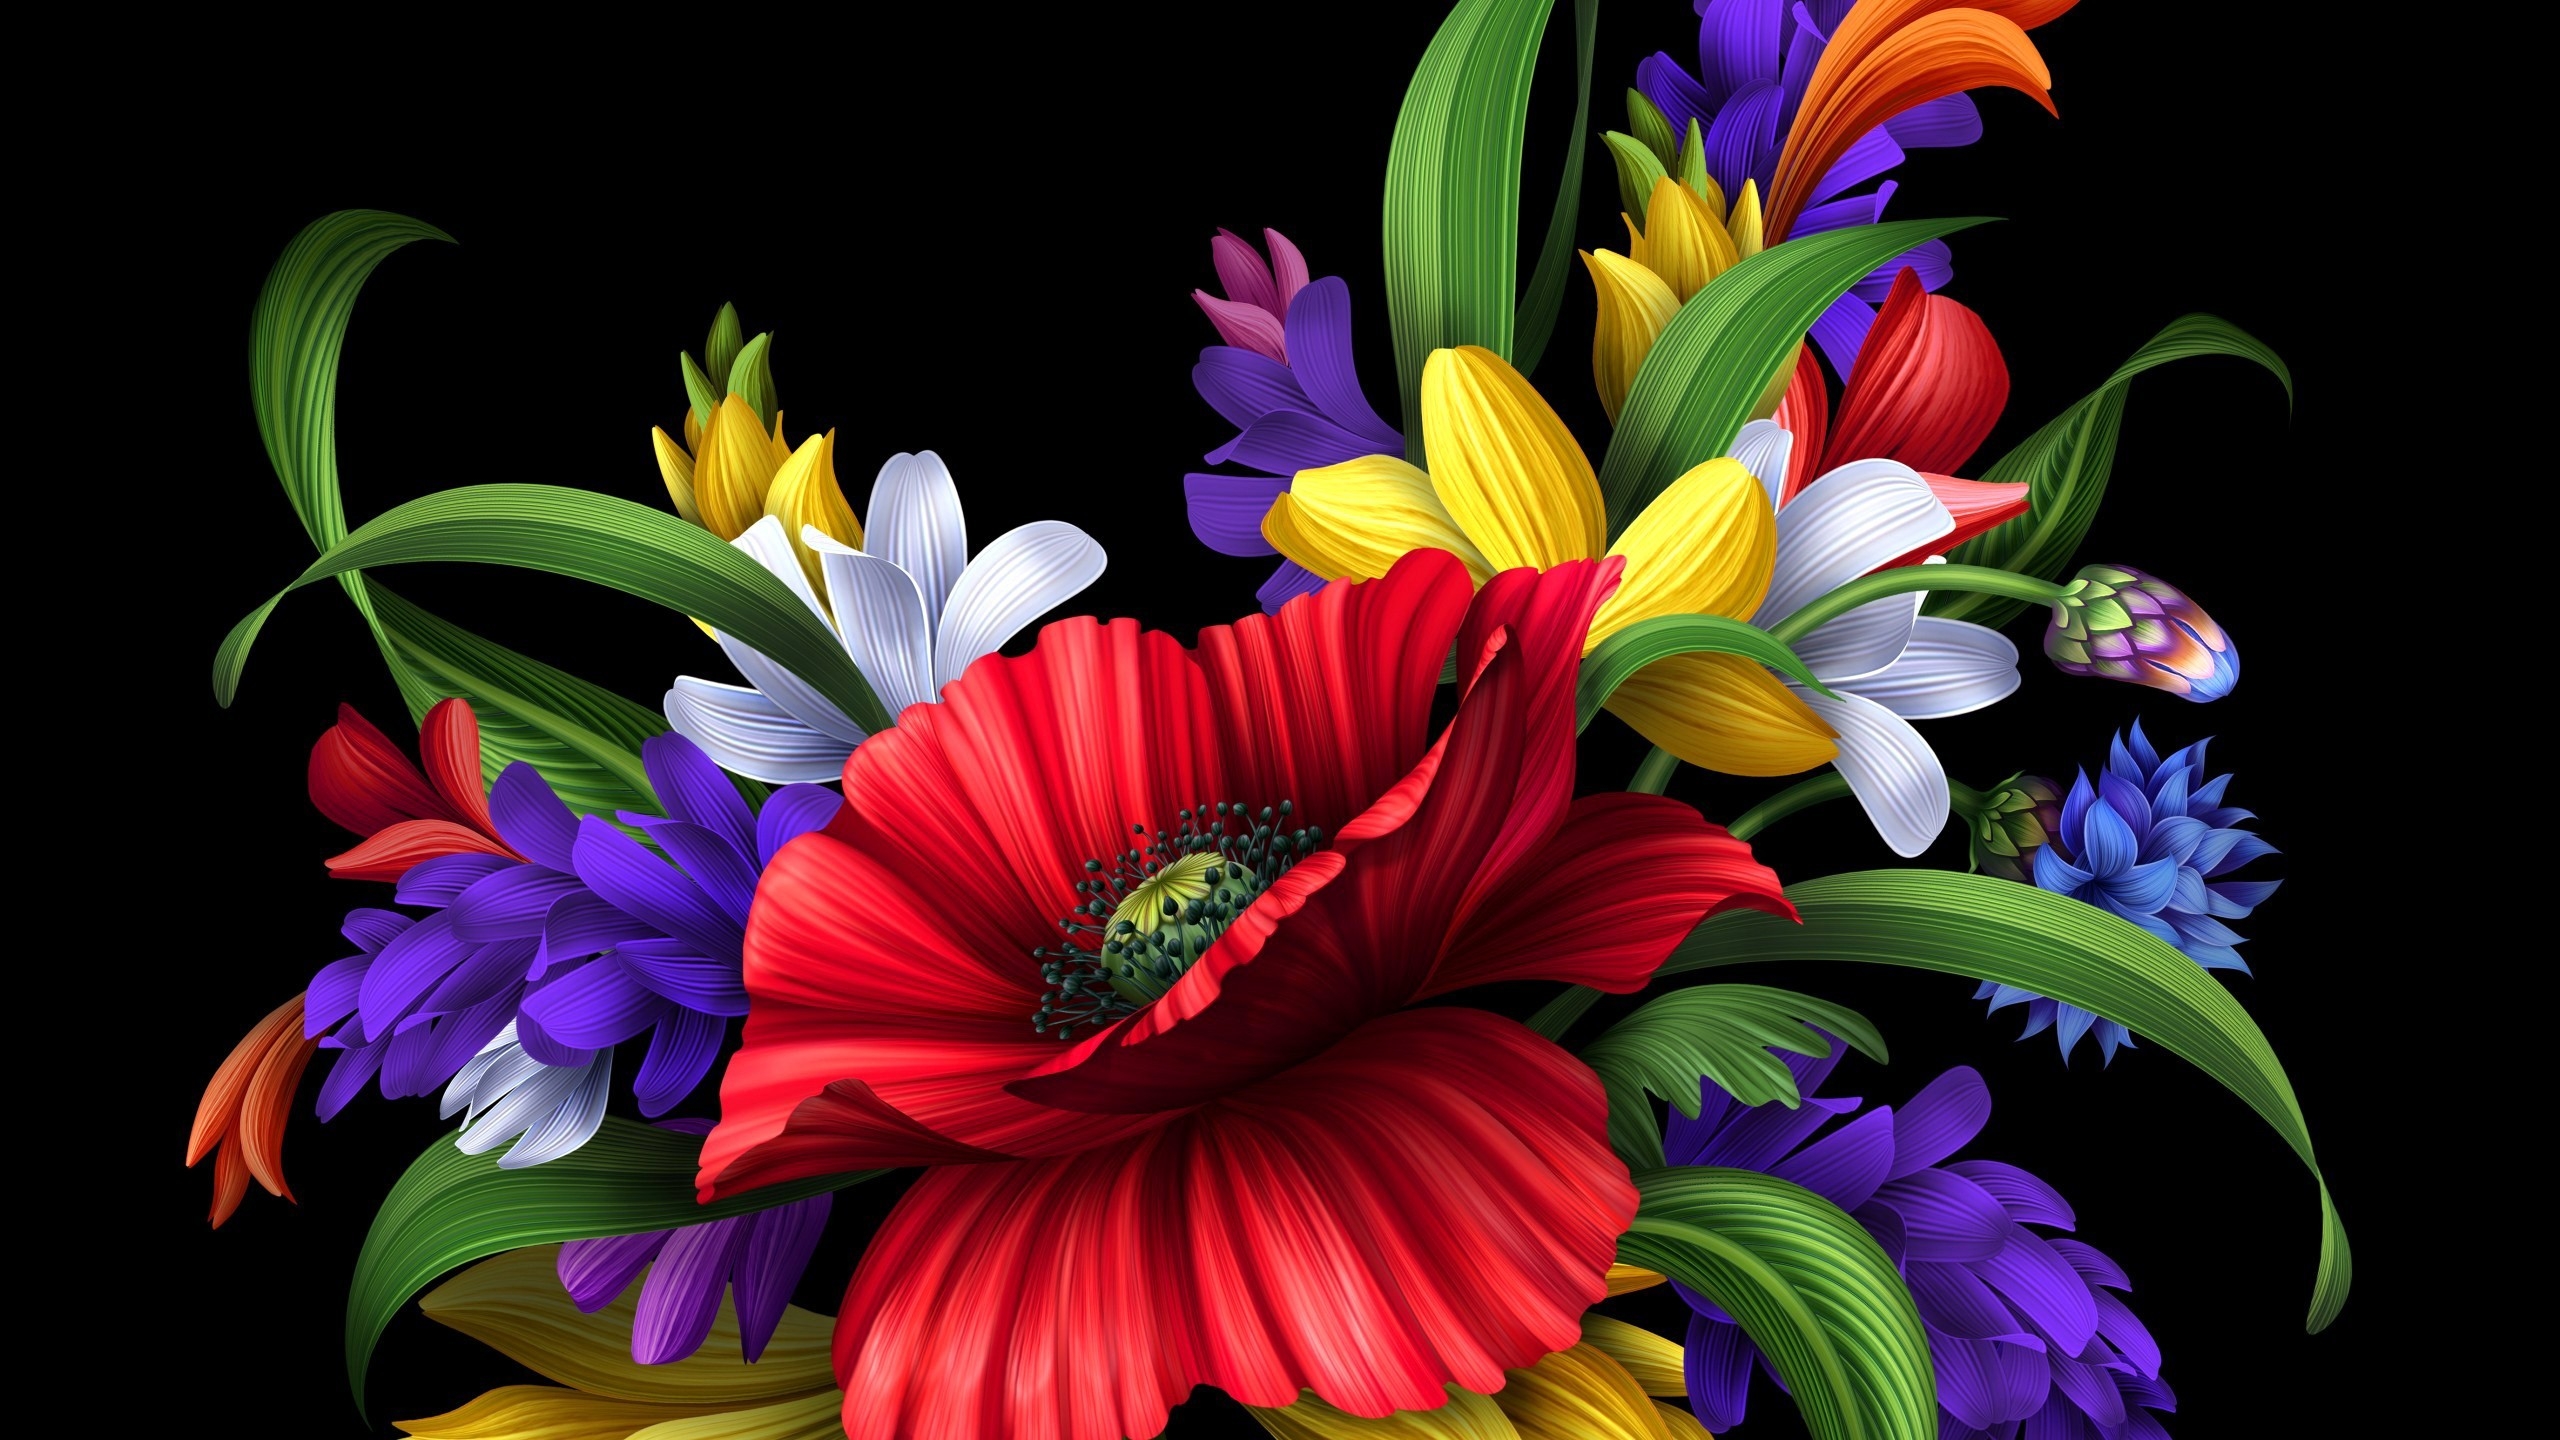 Special Flower Bouquet for 2560x1440 HDTV resolution